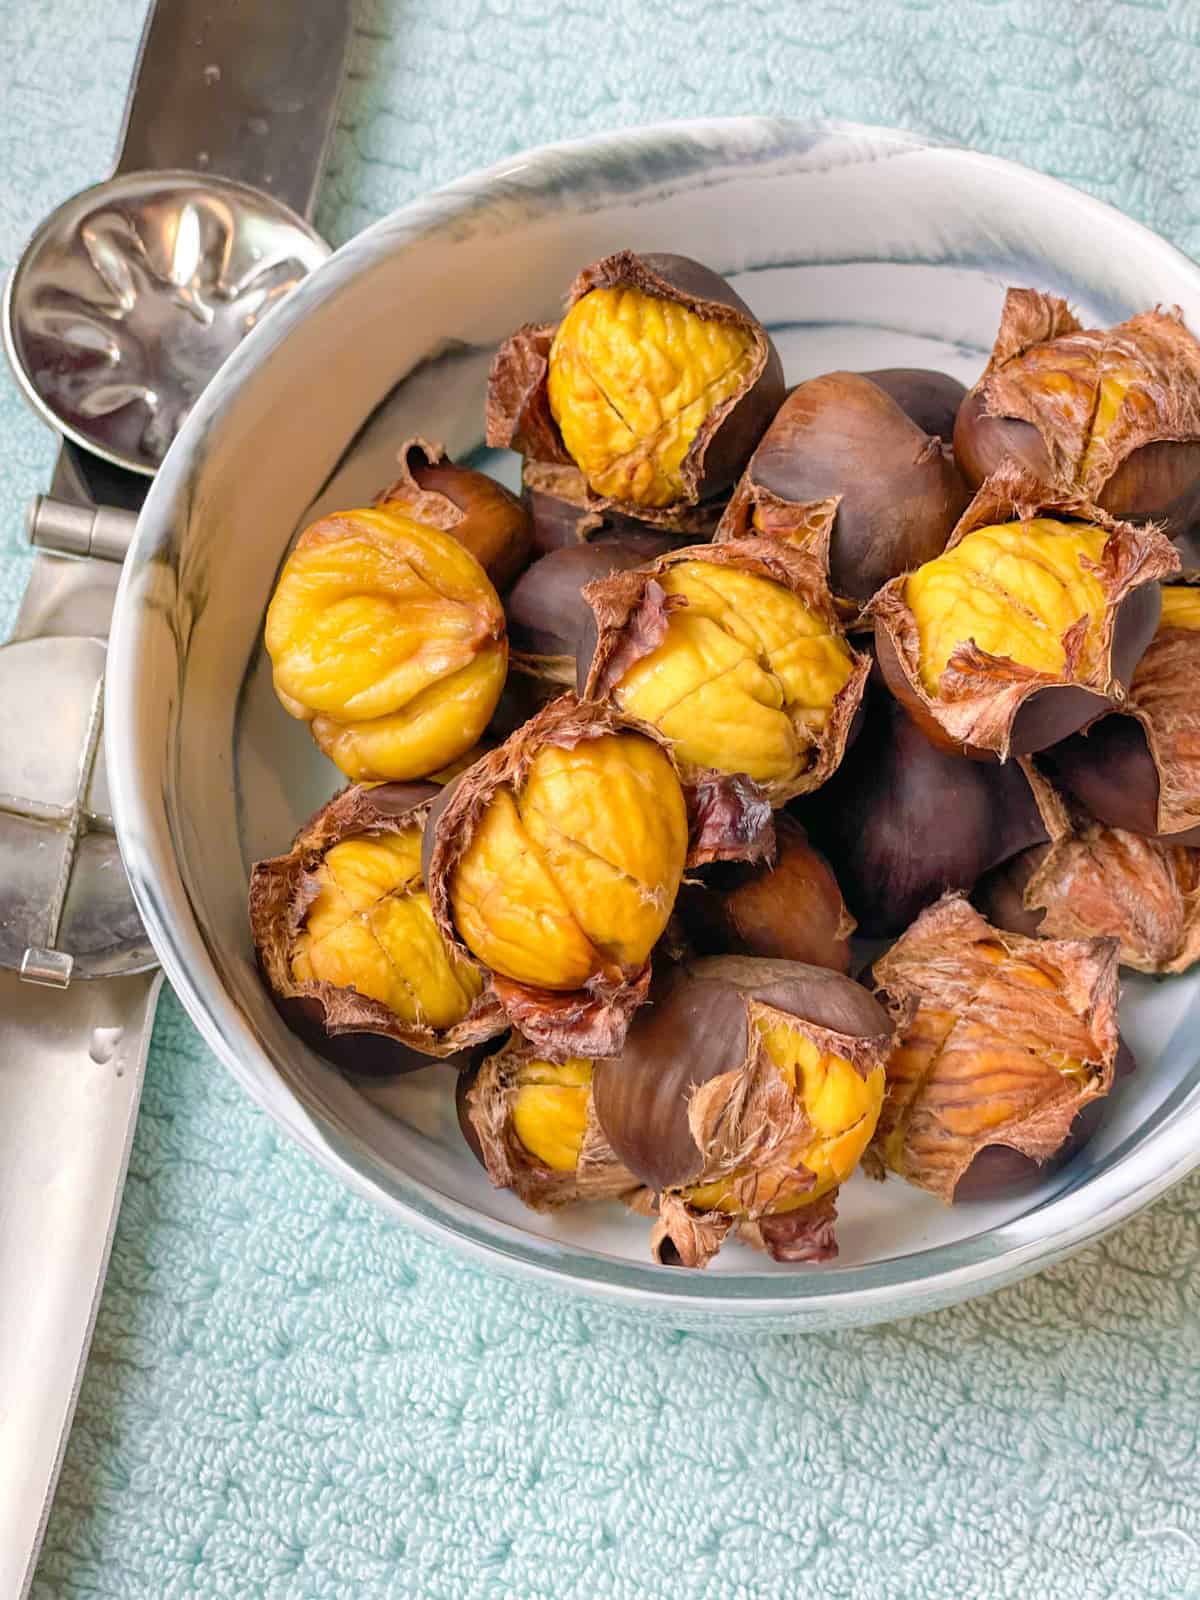 A dish full of yellow roasted chestnuts with curled shells